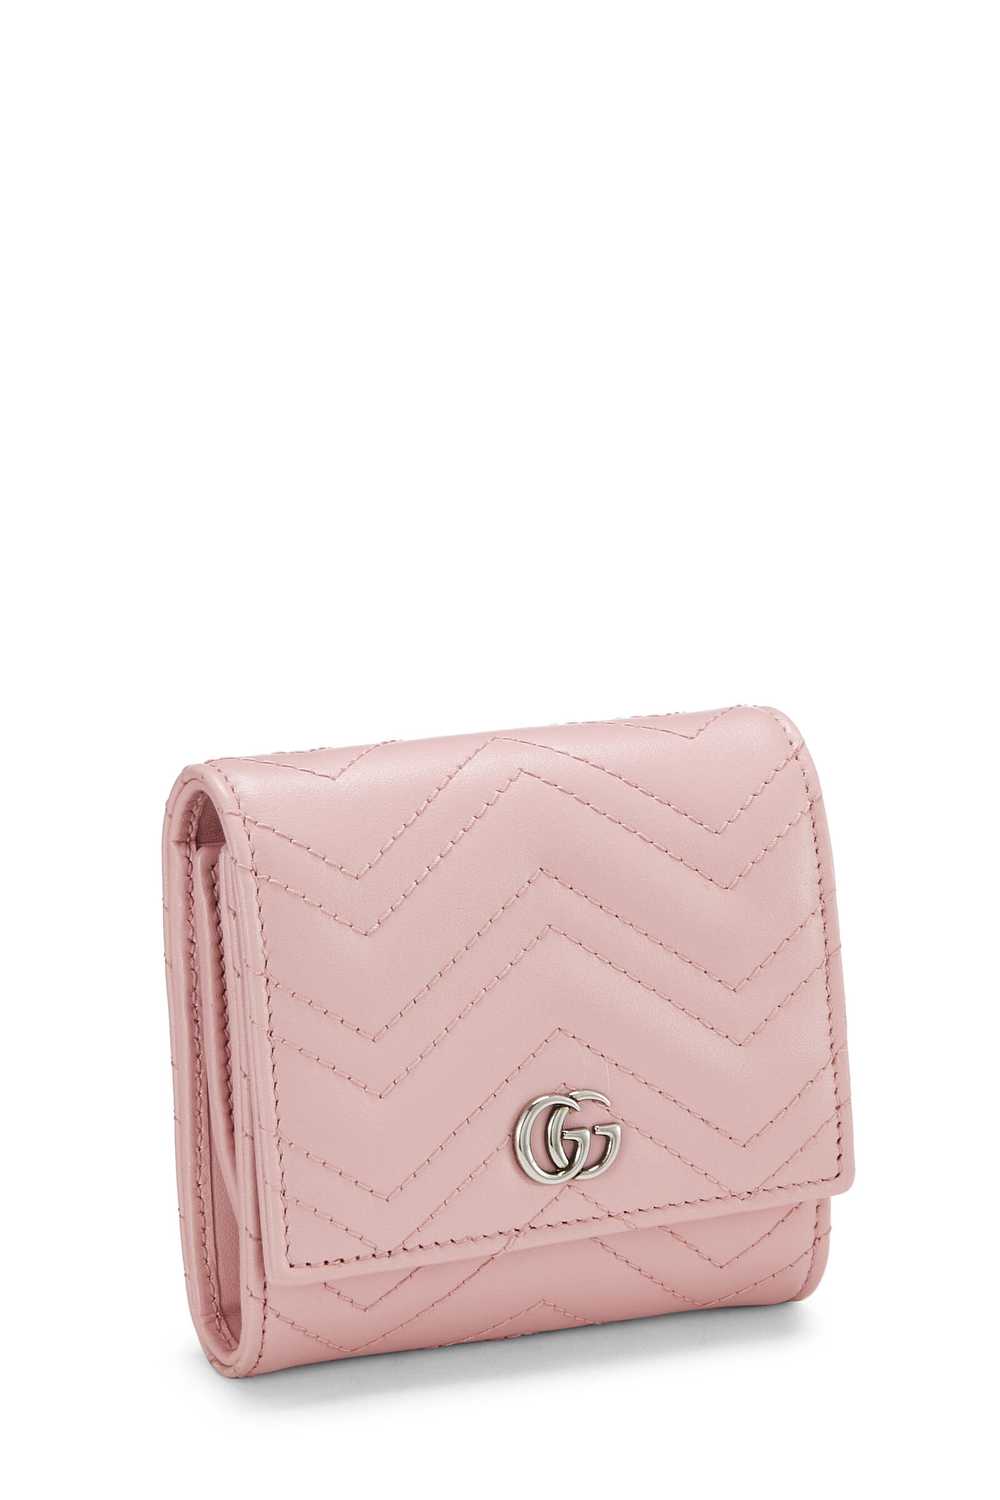 Pink Leather GG Marmont Card Case - image 2